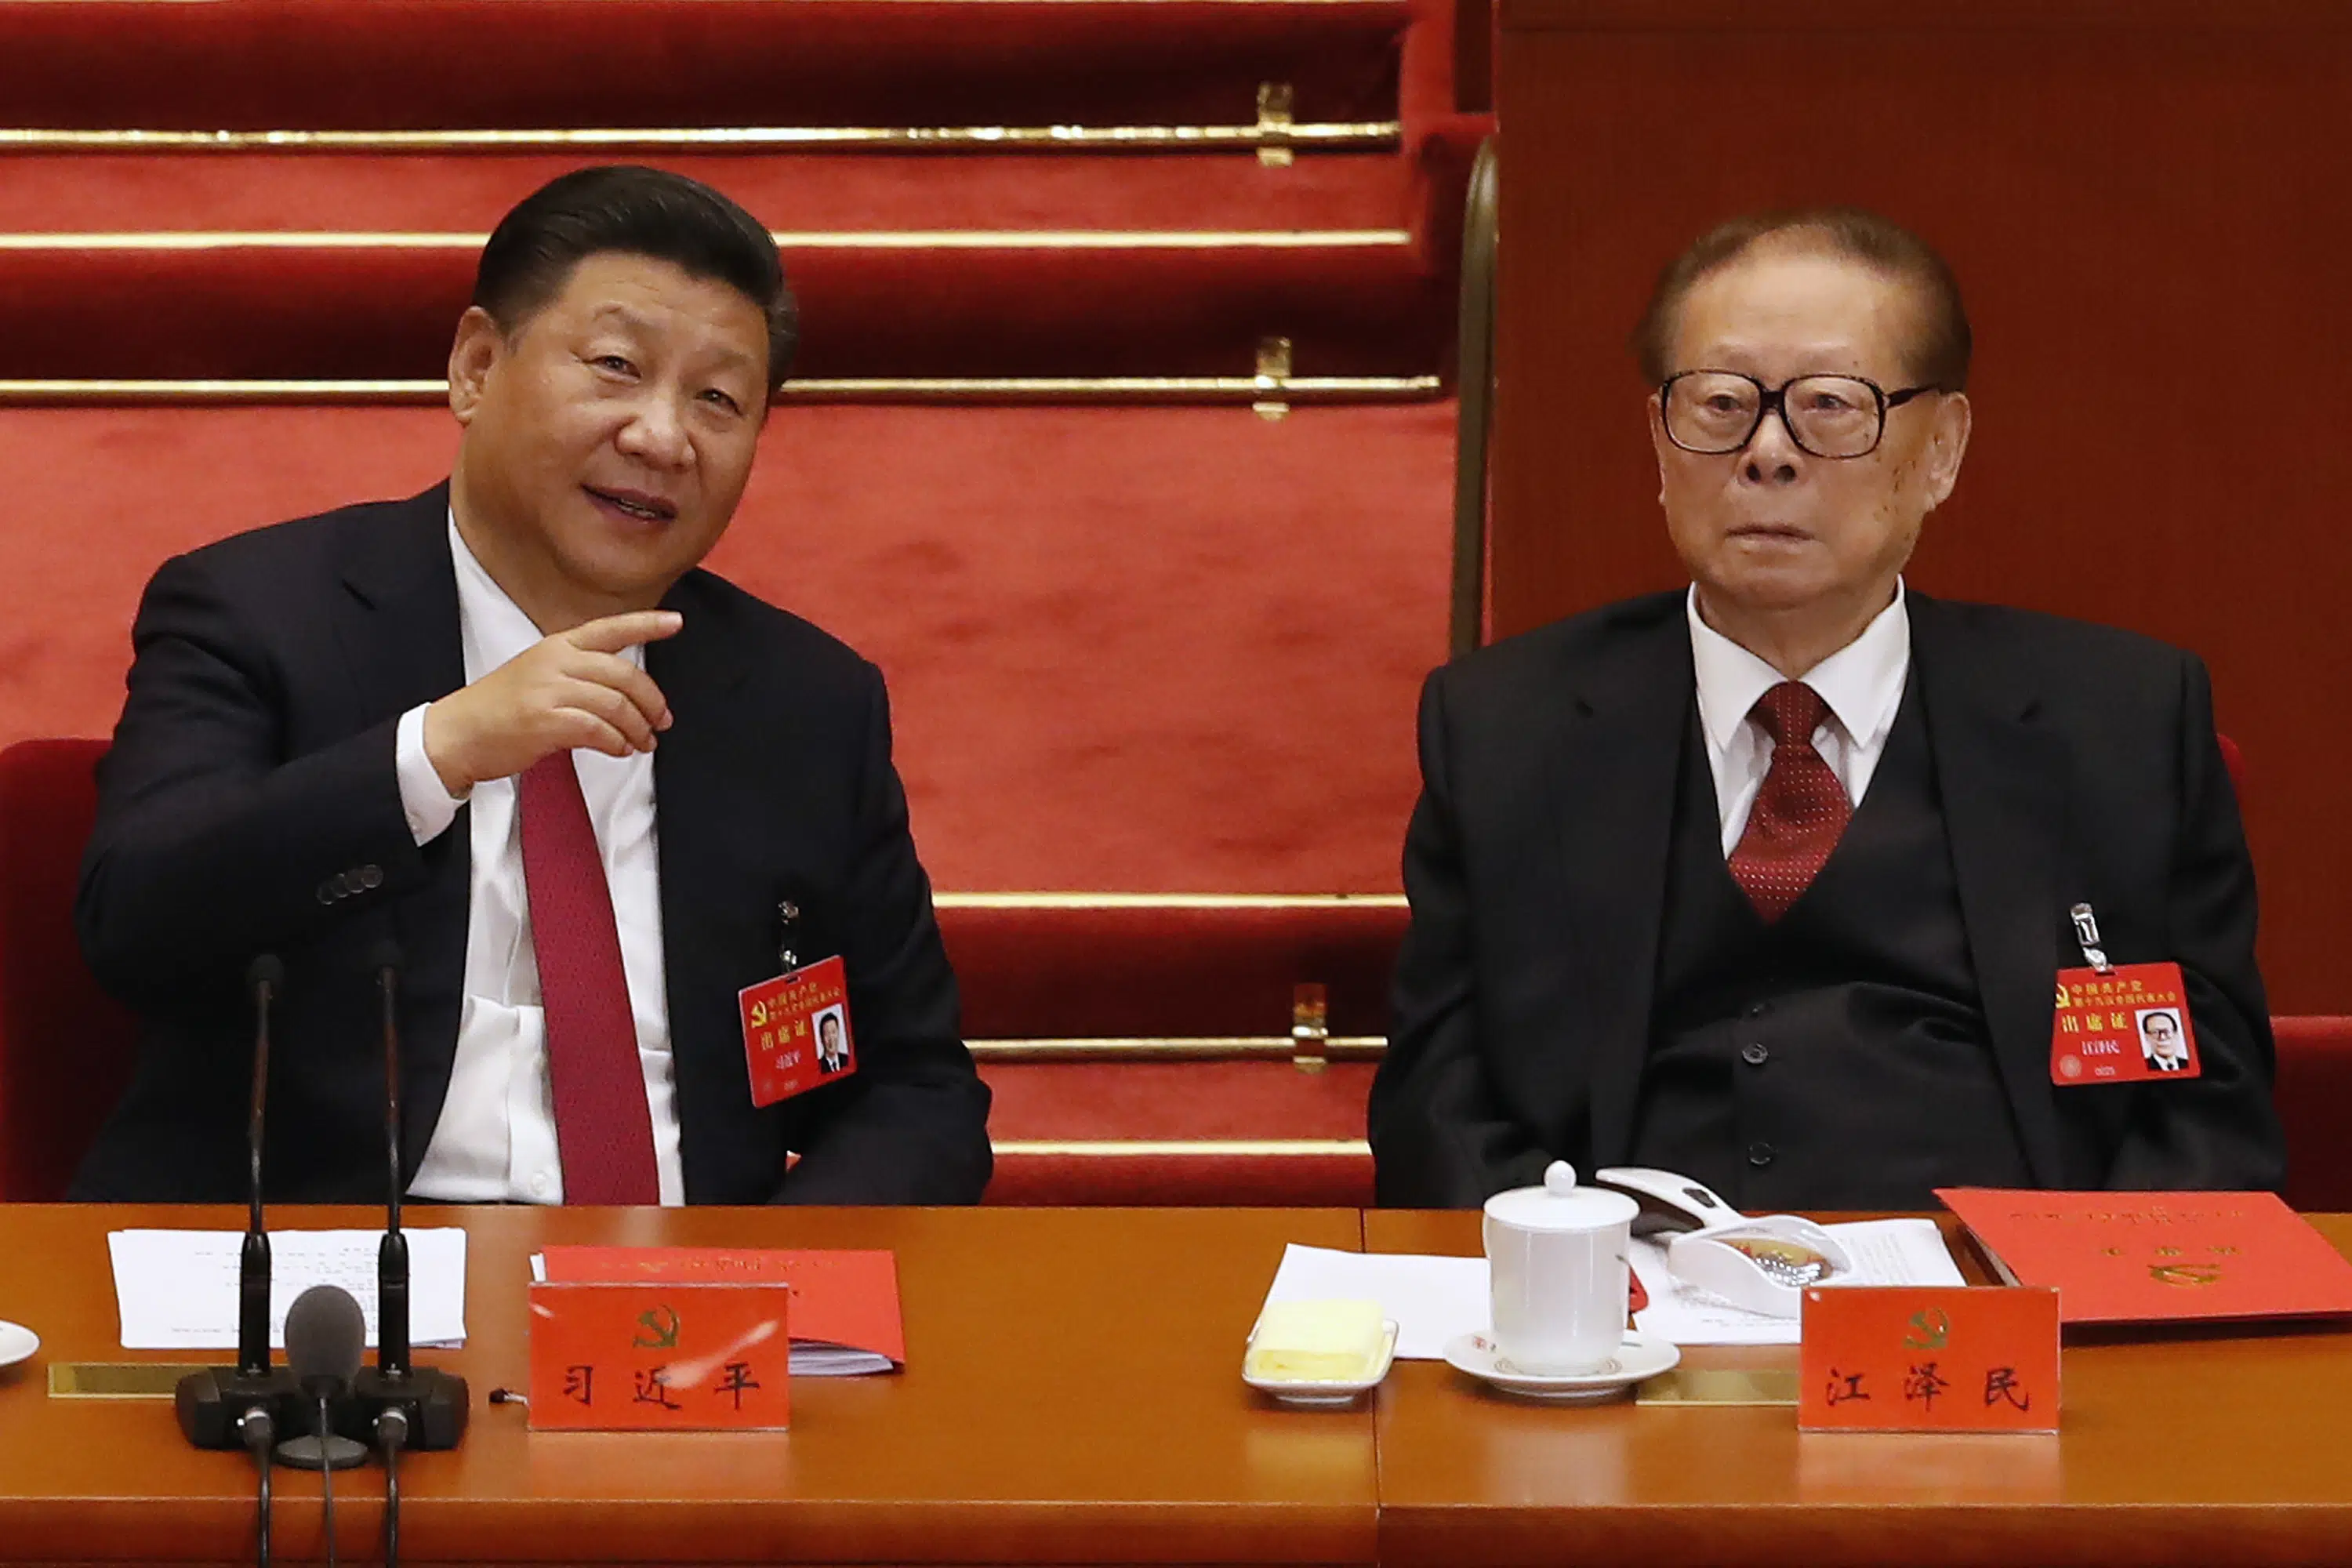 Analysis: Under Jiang, China projected a more open image